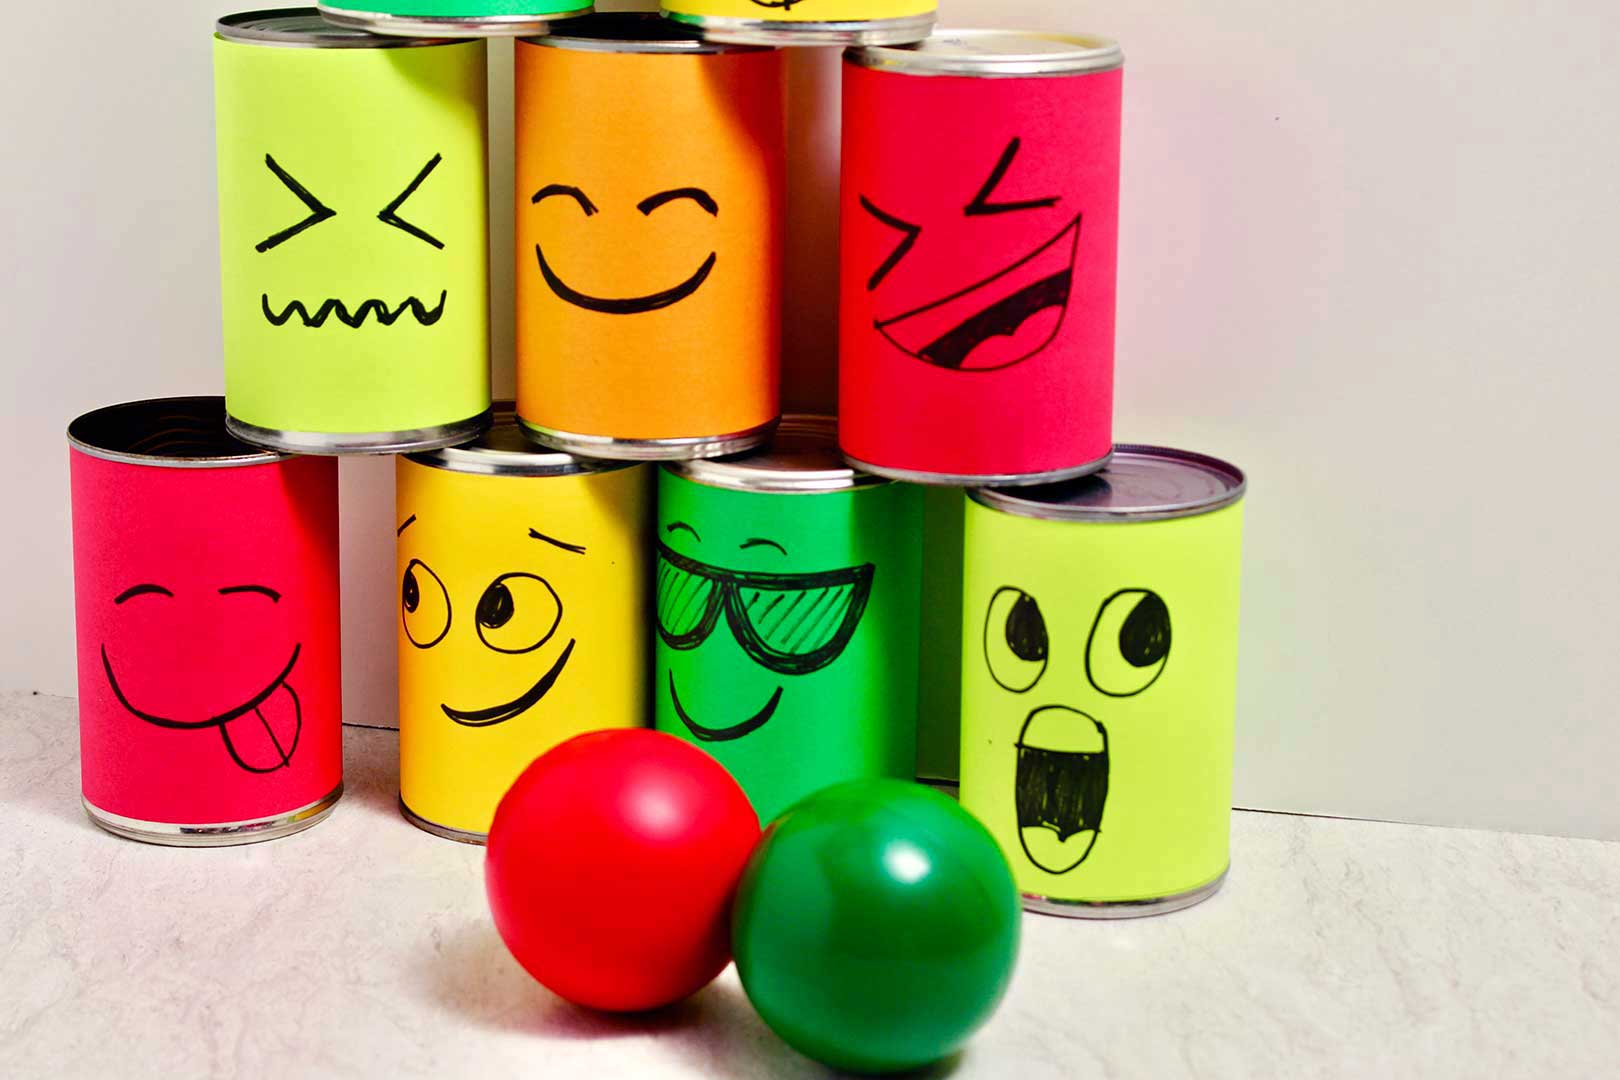 The lower portion of the stacked silly face tin cans with a red and green ball resting nearby.